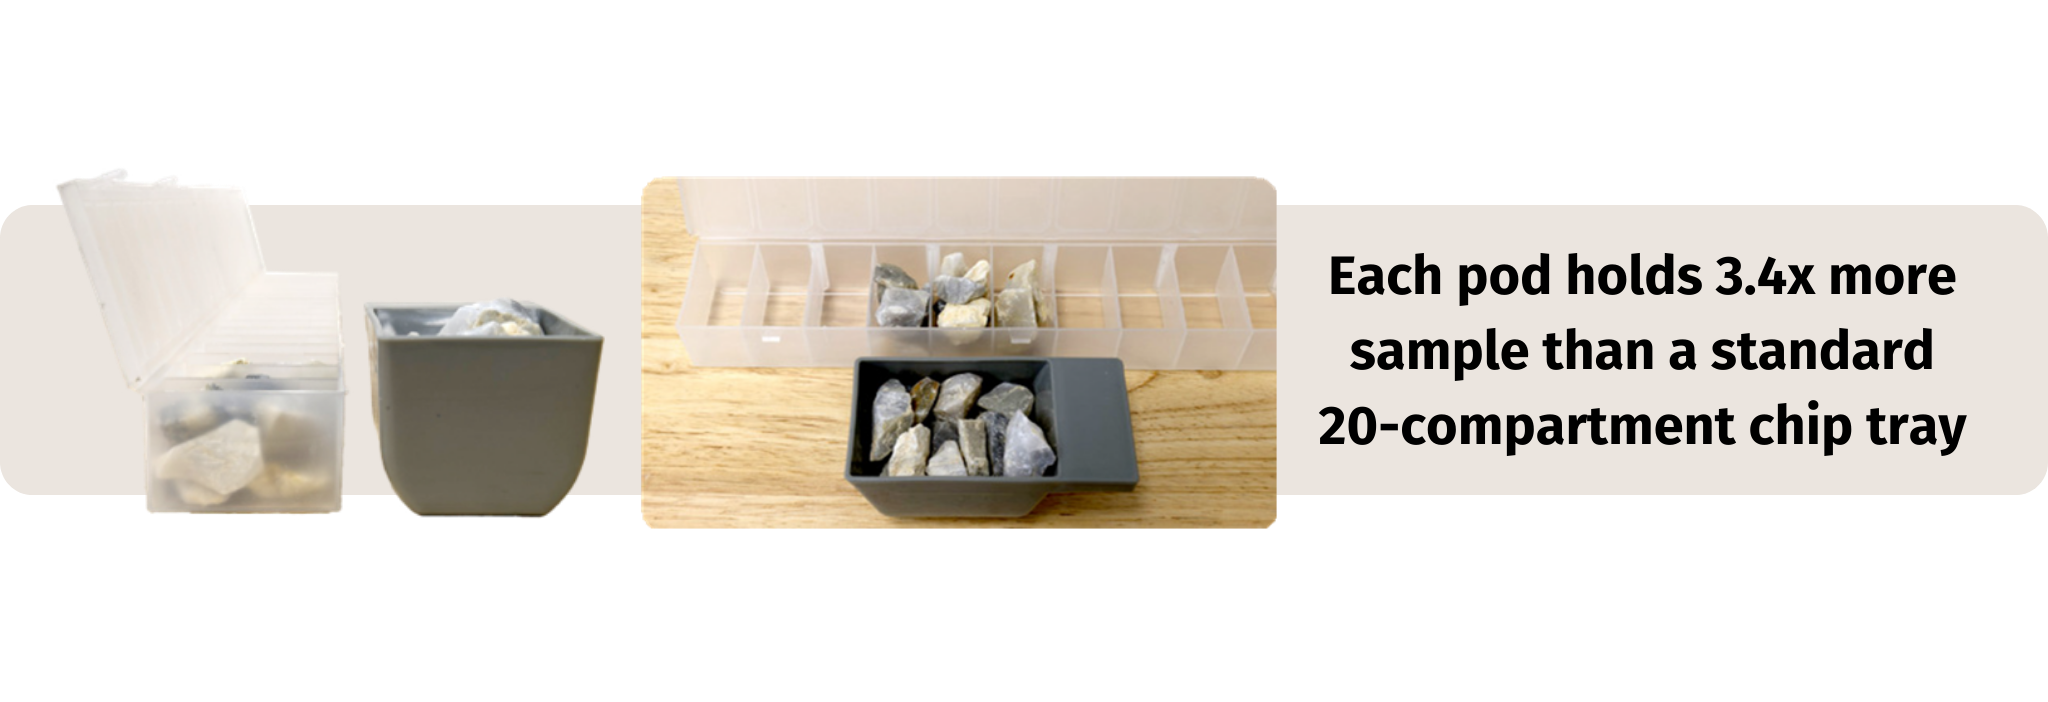 Each pod holds 3.4x more sample than a standard 20-compartment chip tray-1